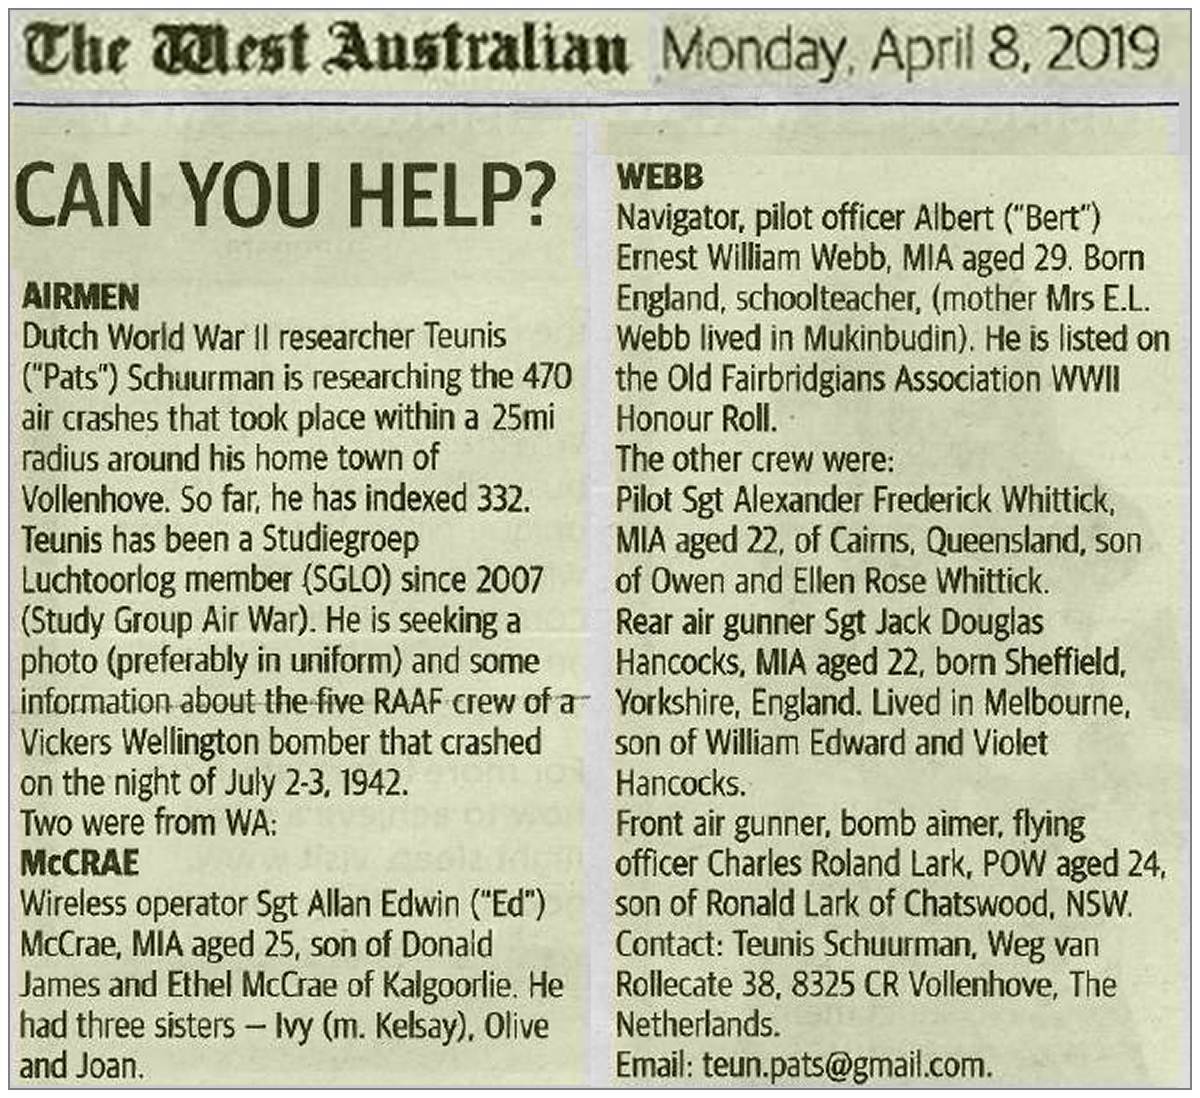 CAN YOU HELP? - The West Australian - Monday, April 8, 2019 - page 63